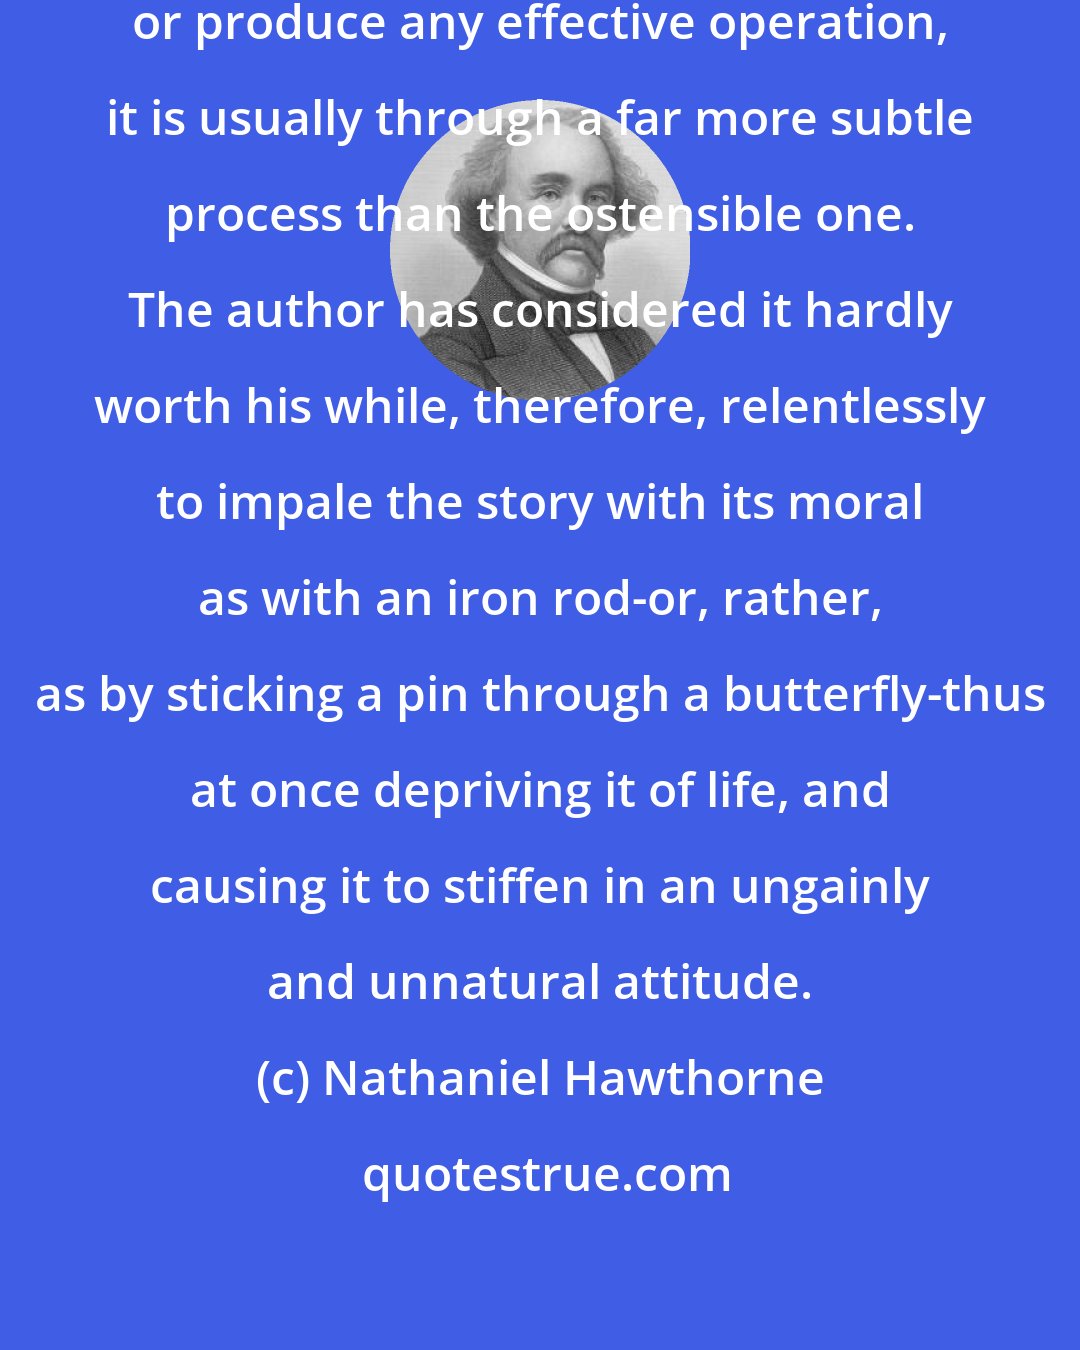 Nathaniel Hawthorne: When romances do really teach anything, or produce any effective operation, it is usually through a far more subtle process than the ostensible one. The author has considered it hardly worth his while, therefore, relentlessly to impale the story with its moral as with an iron rod-or, rather, as by sticking a pin through a butterfly-thus at once depriving it of life, and causing it to stiffen in an ungainly and unnatural attitude.